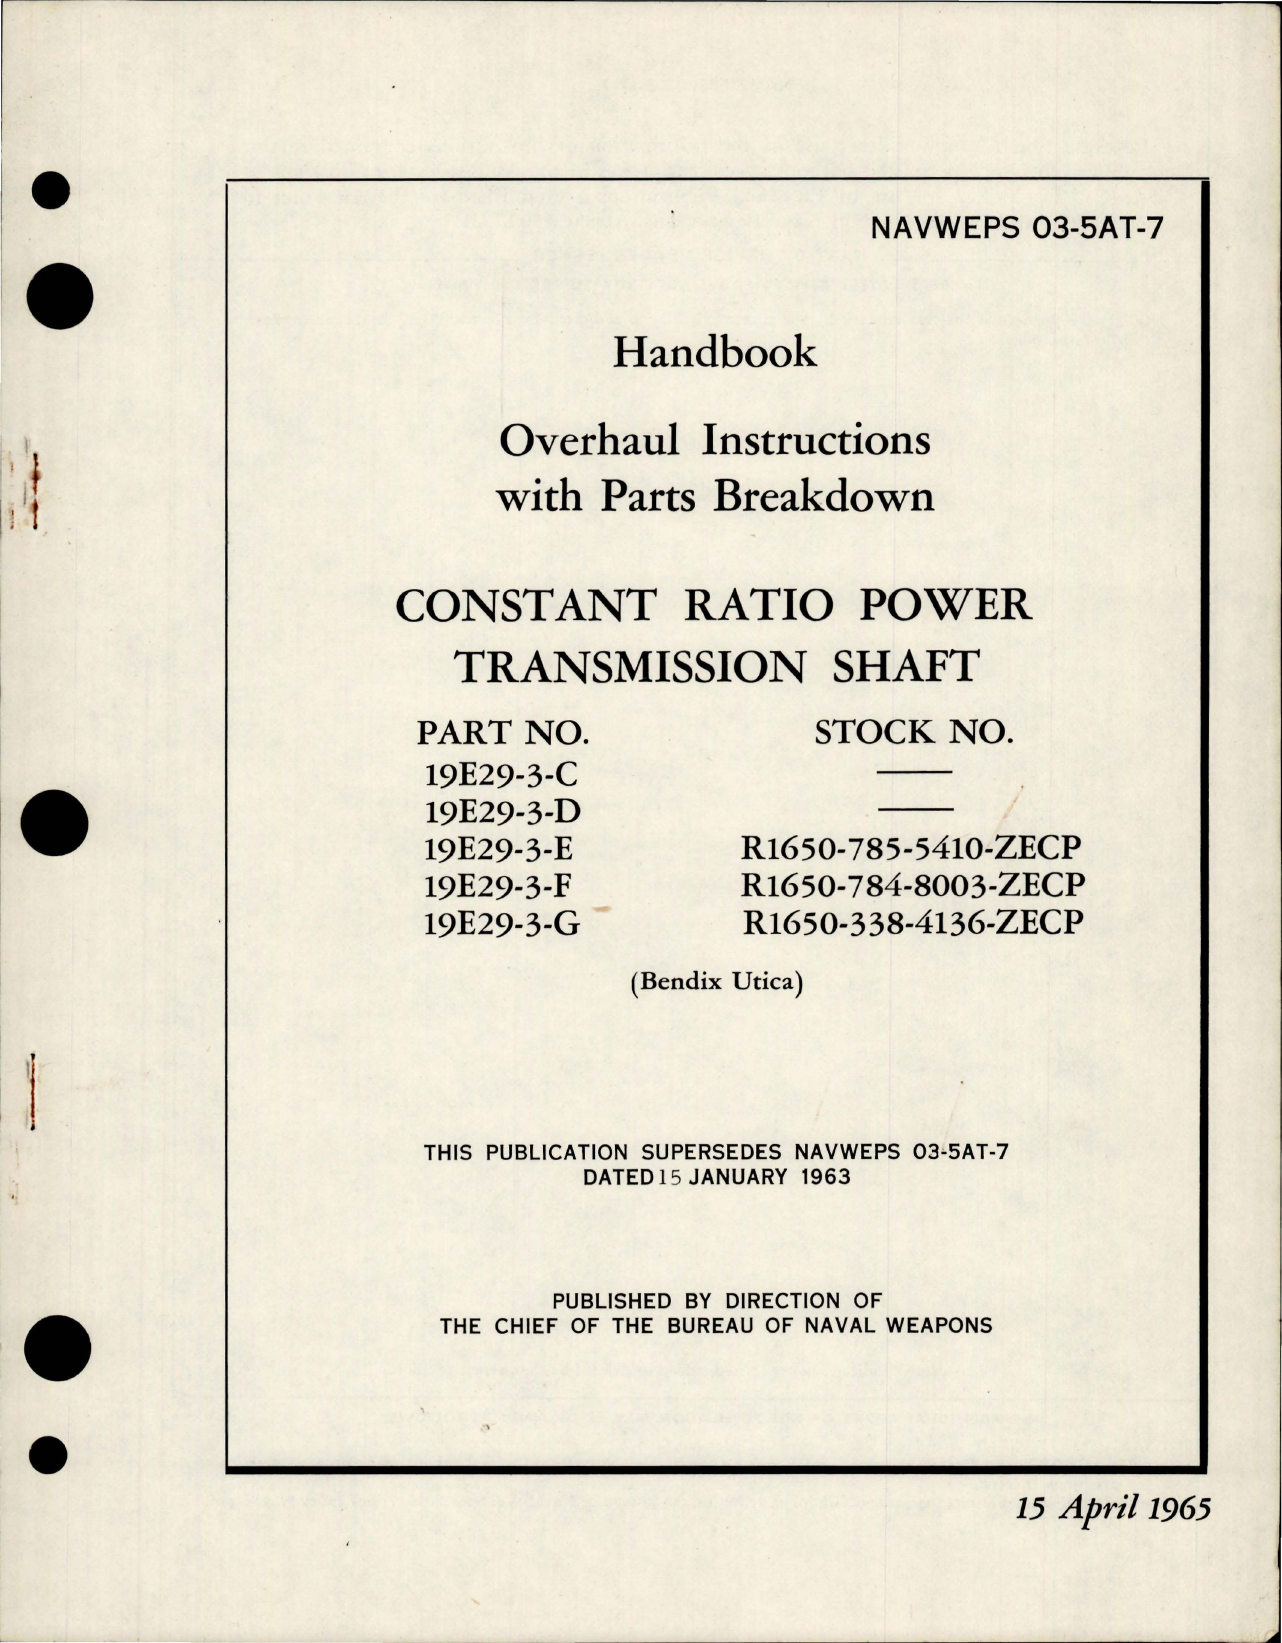 Sample page 1 from AirCorps Library document: Overhaul Instructions with Parts Breakdown for Constant Ratio Power Transmission Shaft